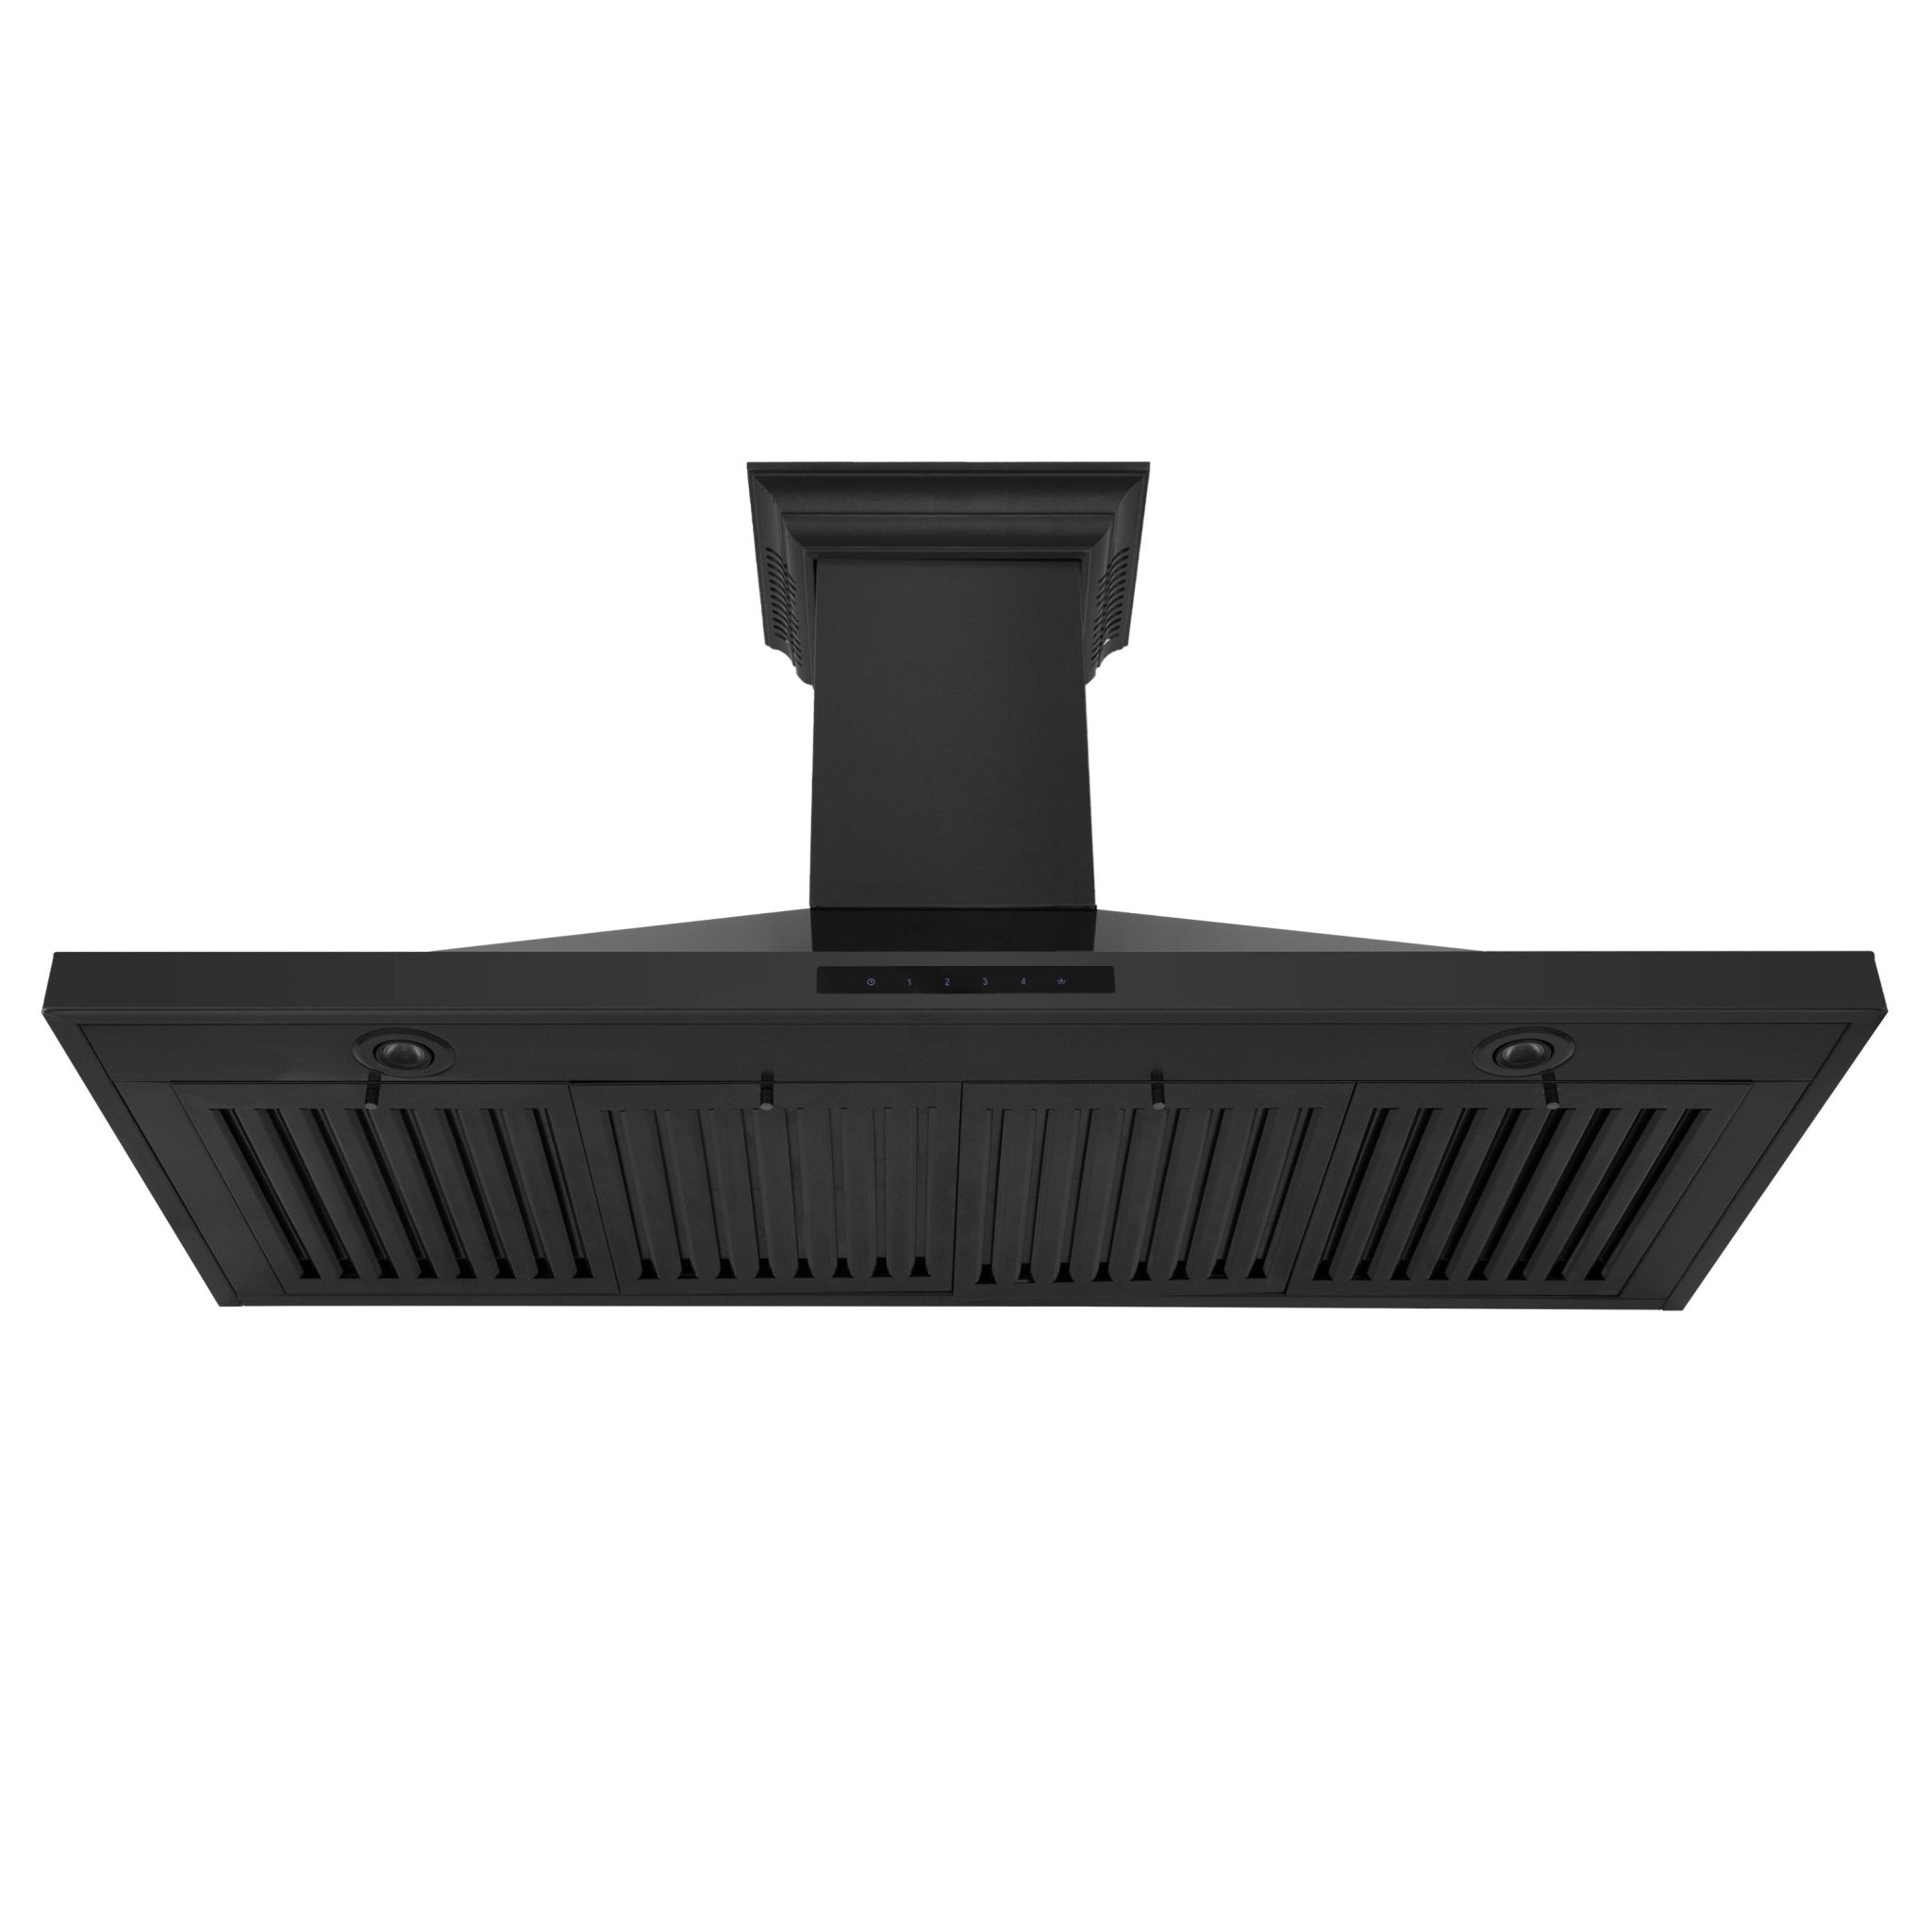 ZLINE Ducted Vent Wall Mount Range Hood in Black Stainless Steel with Built-in ZLINE CrownSound Bluetooth Speakers (BSKBNCRN-BT) - New Star Living